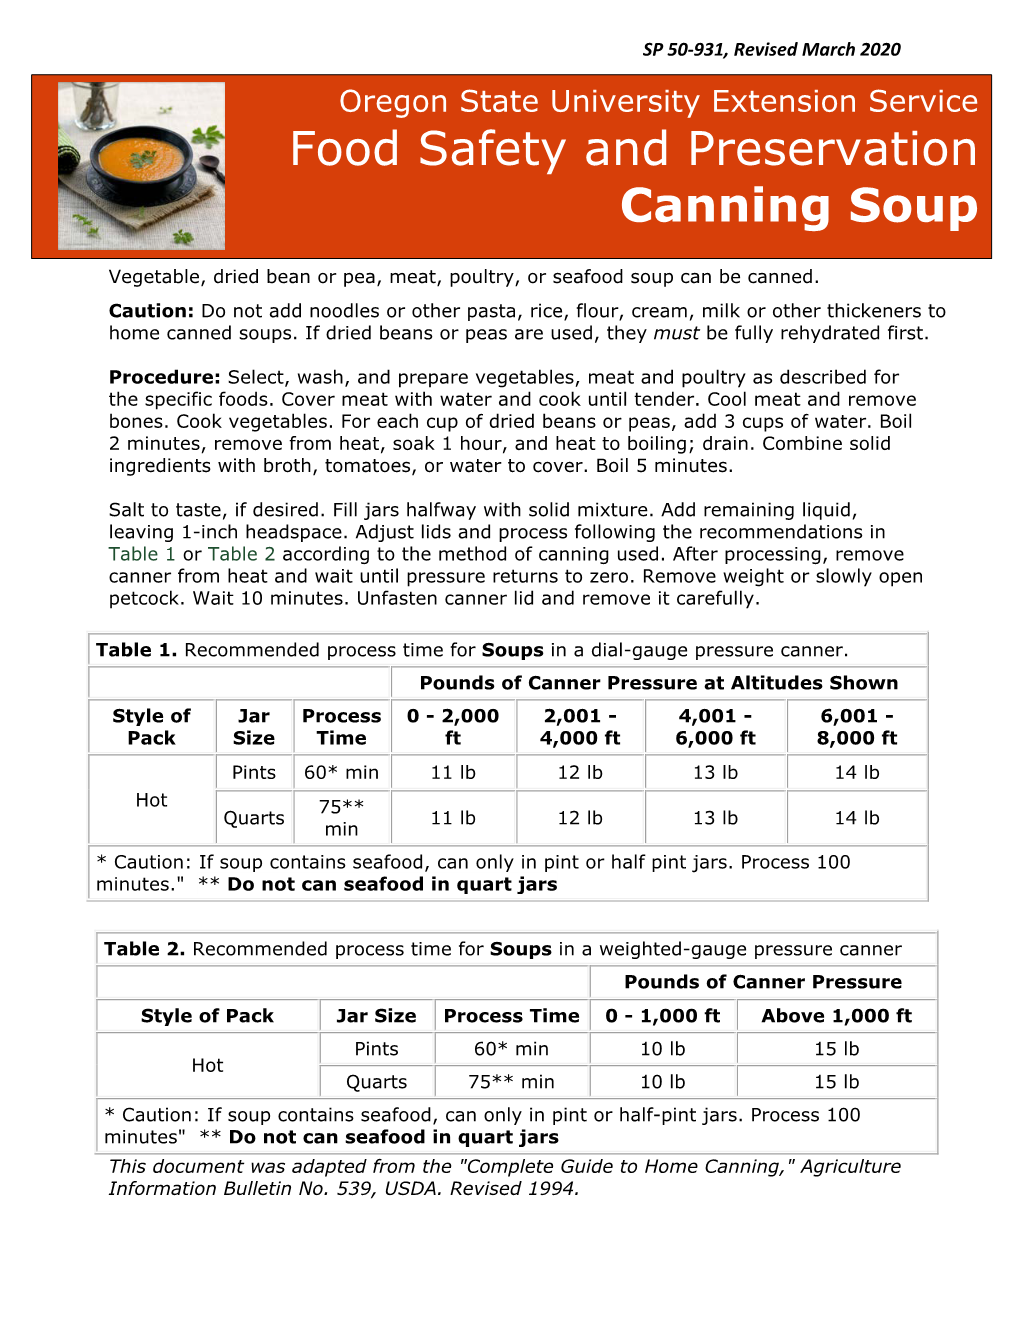 Food Safety and Preservation Canning Soup